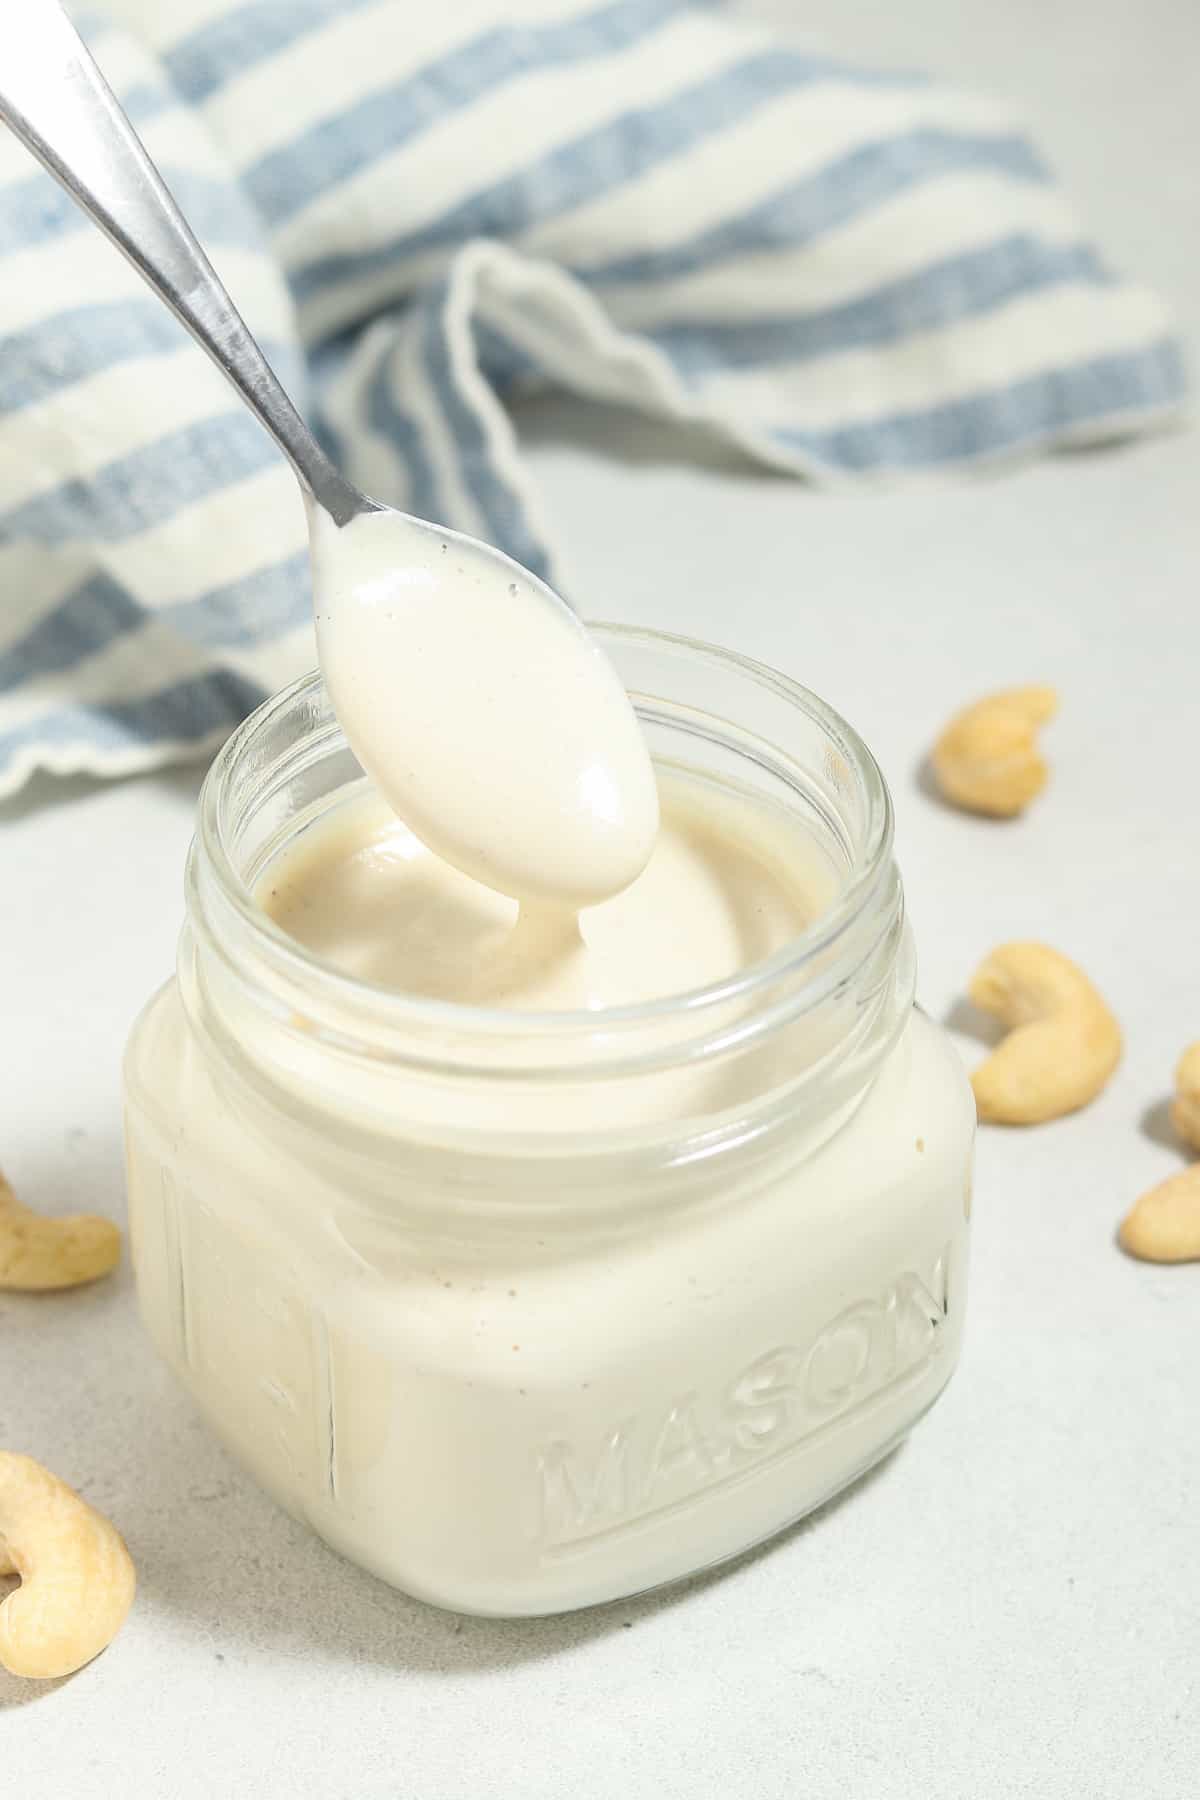 Pulling a spoon out of a jar of cashew cream.